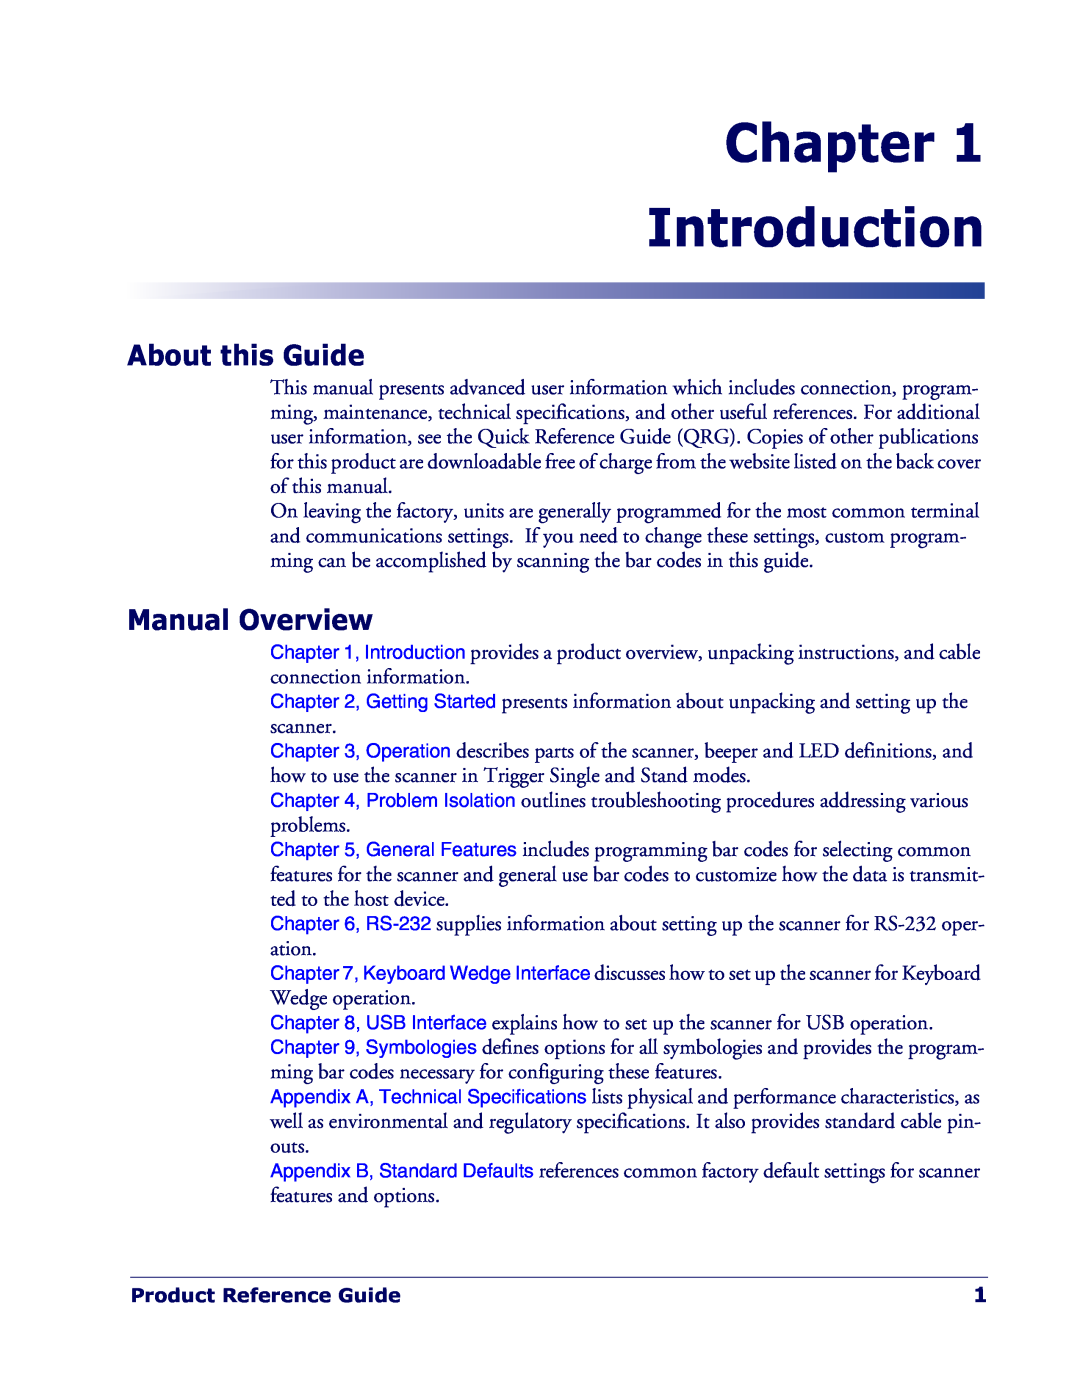 Datalogic Scanning QD 2300 manual Chapter Introduction, About this Guide, Manual Overview 